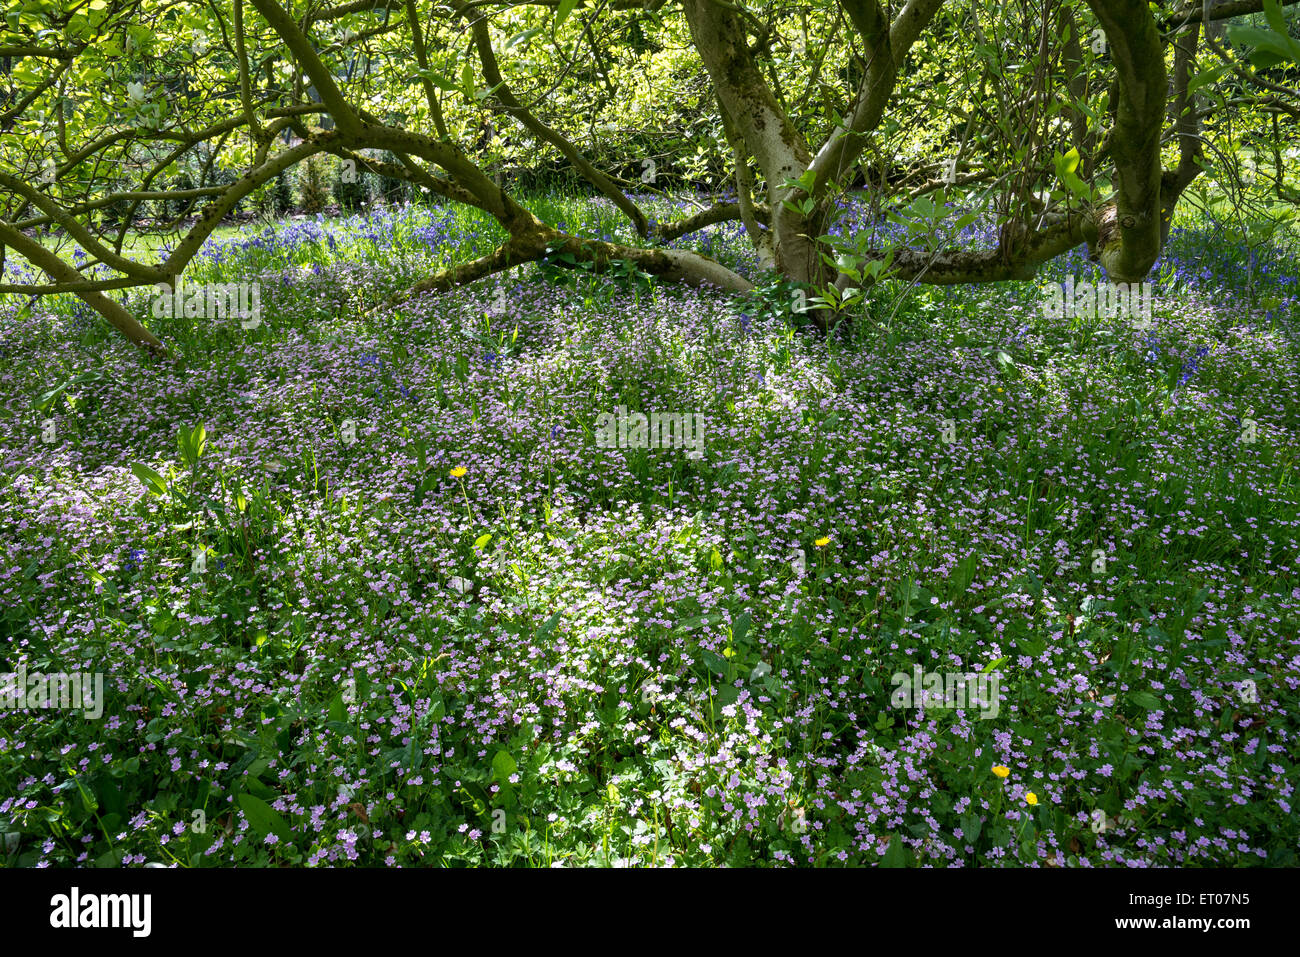 Mass of dainty pink Claytonia flowers beneath a Magnolia tree in a spring garden. Stock Photo